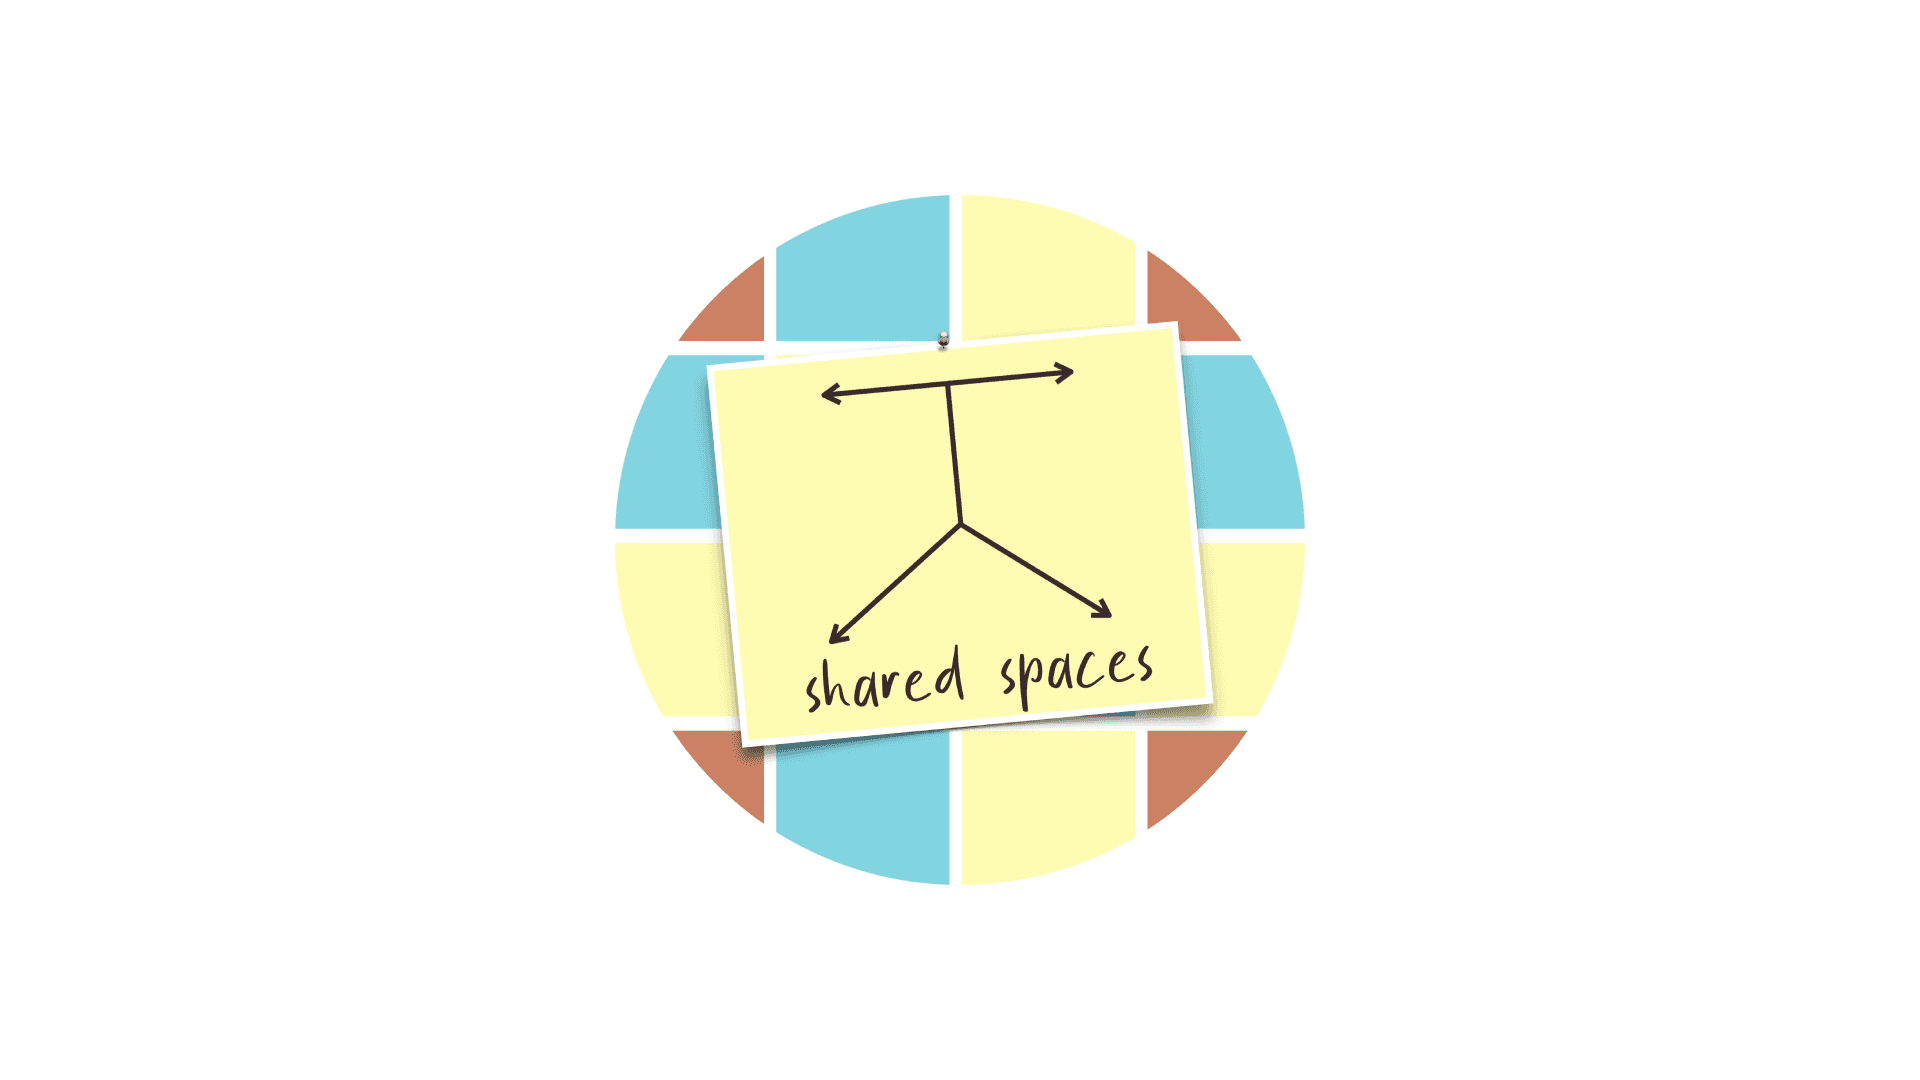 Made it, March! - Shared Spaces' 4th Anniversary Poster